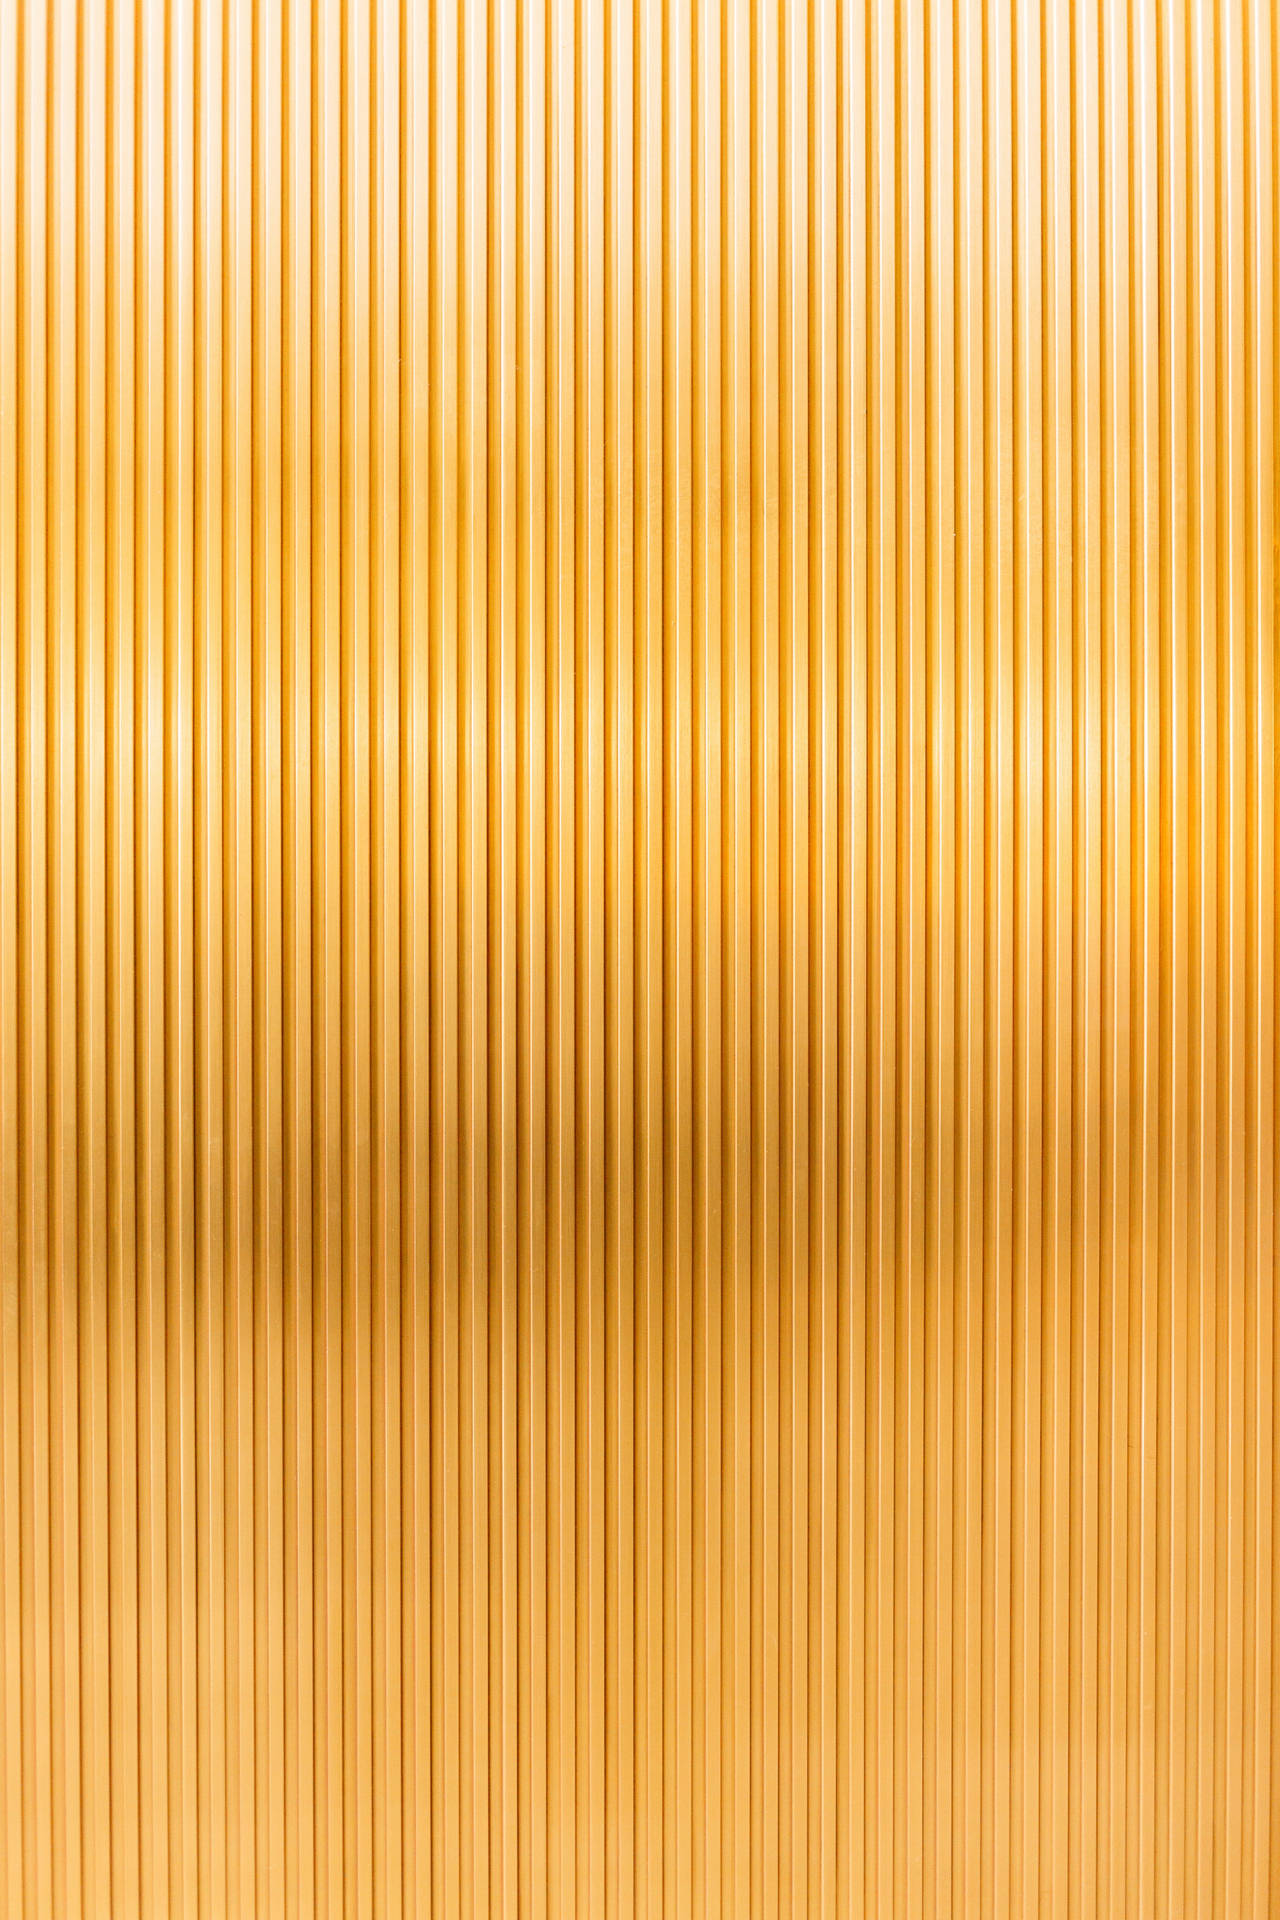 Textured 3648X5472 Wallpaper and Background Image